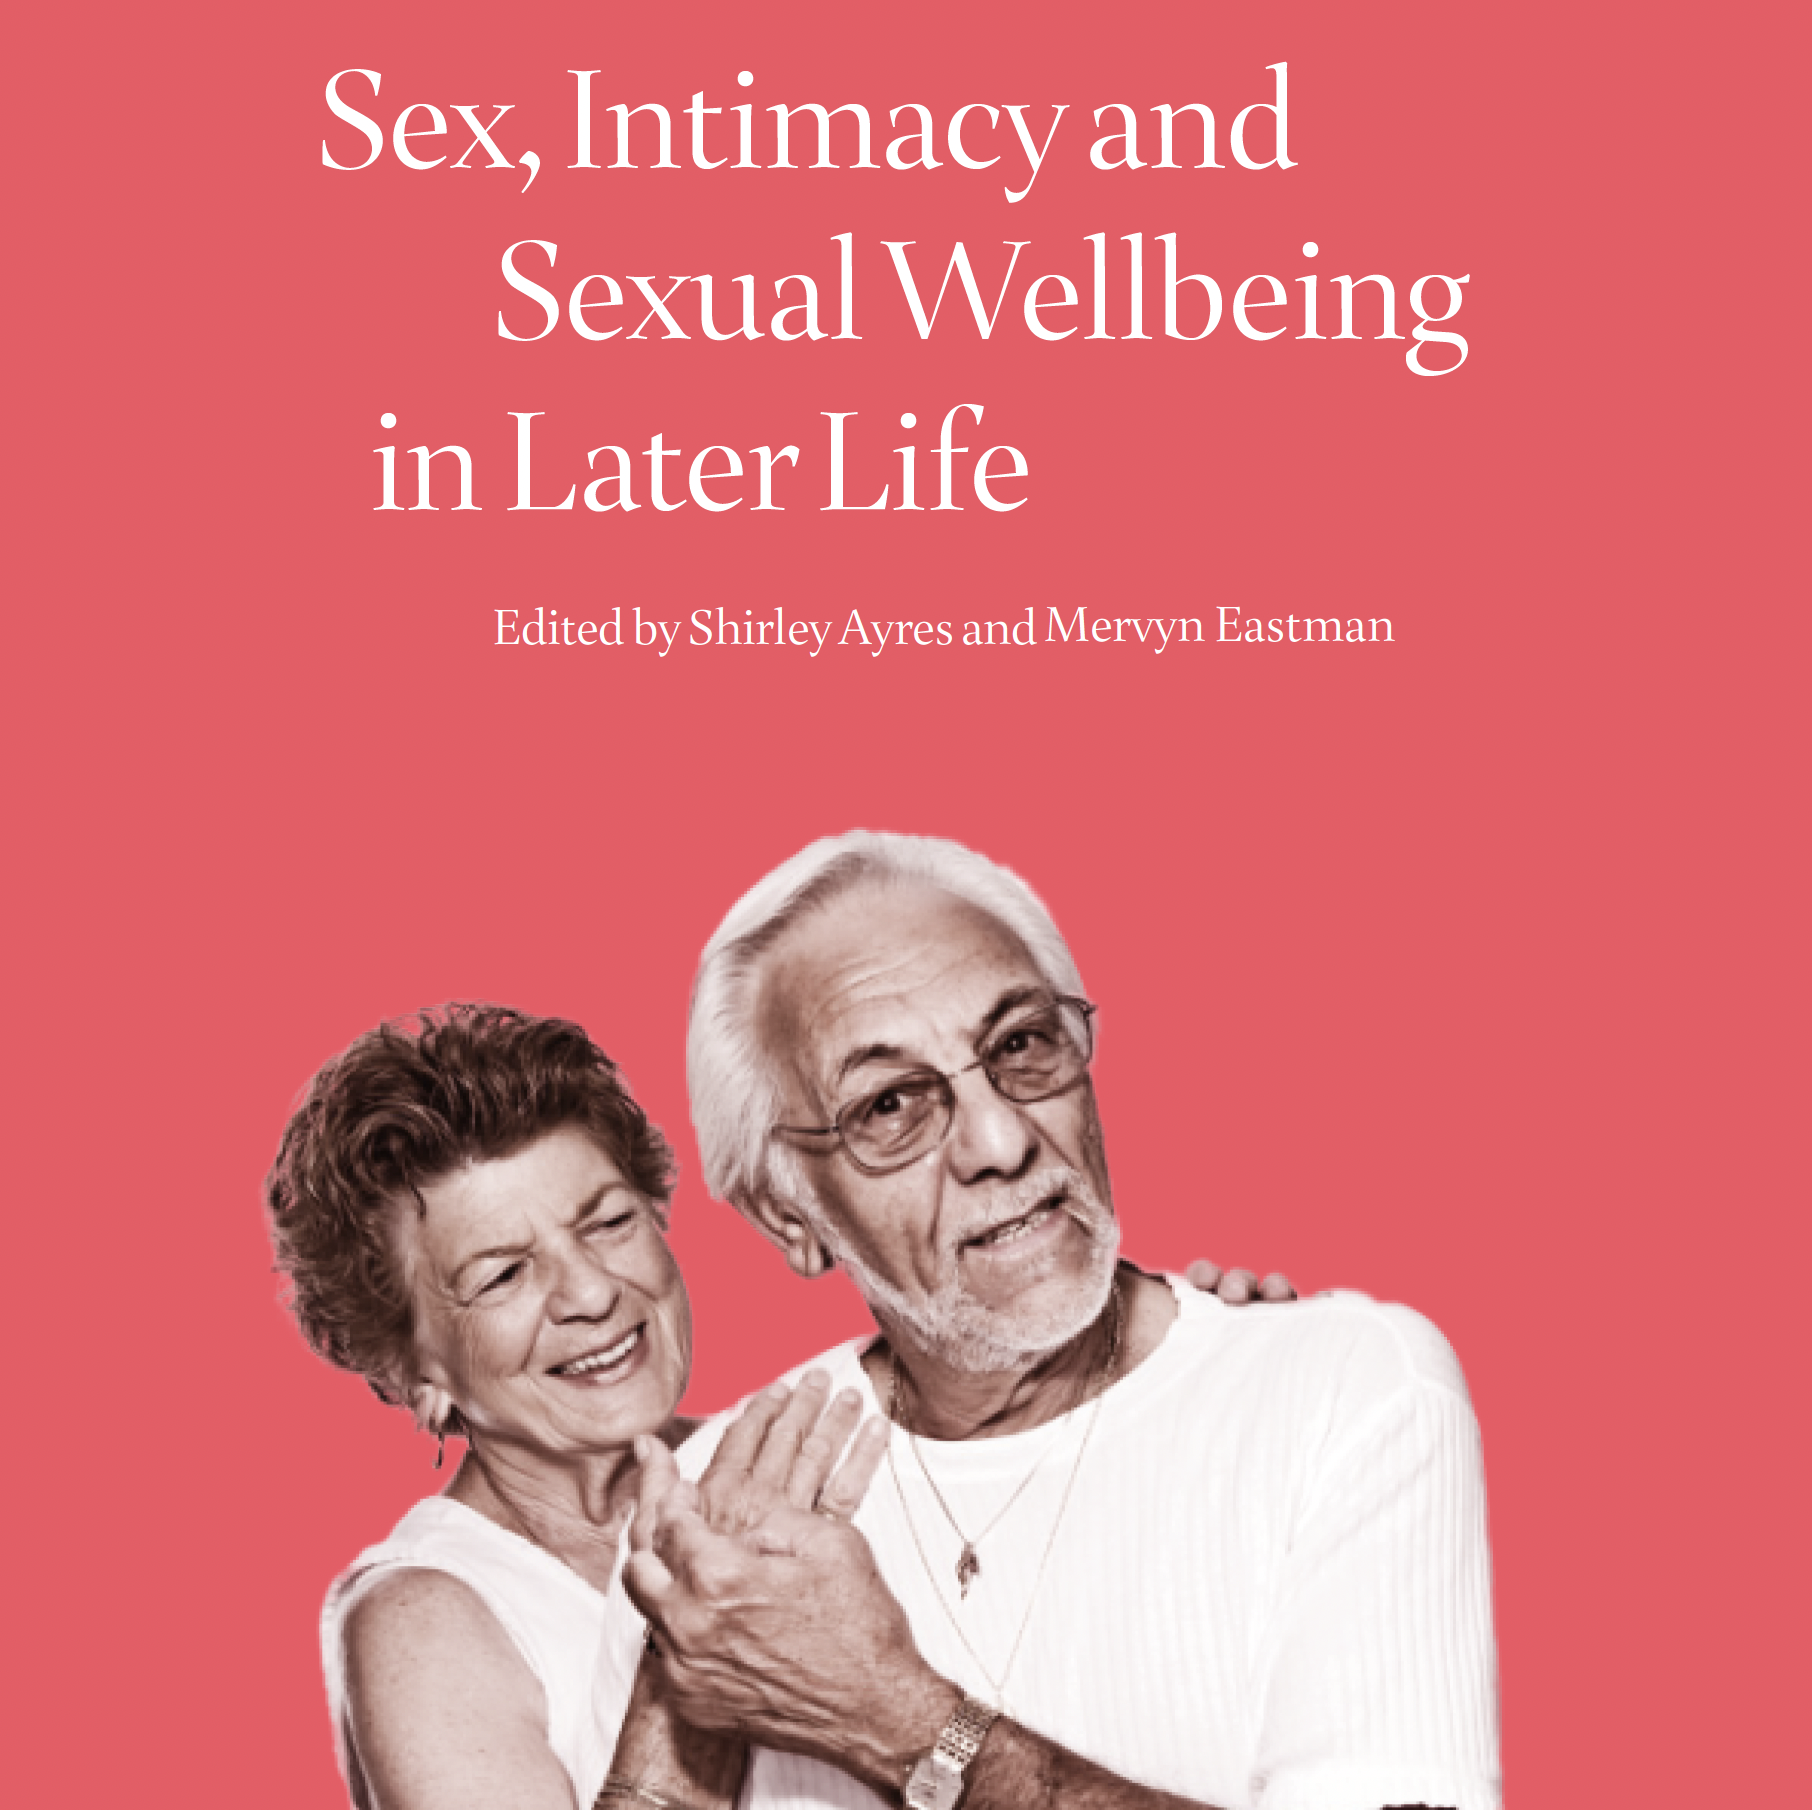 Challenging ageist attitudes on sex, intimacy and sexual wellbeing in later life